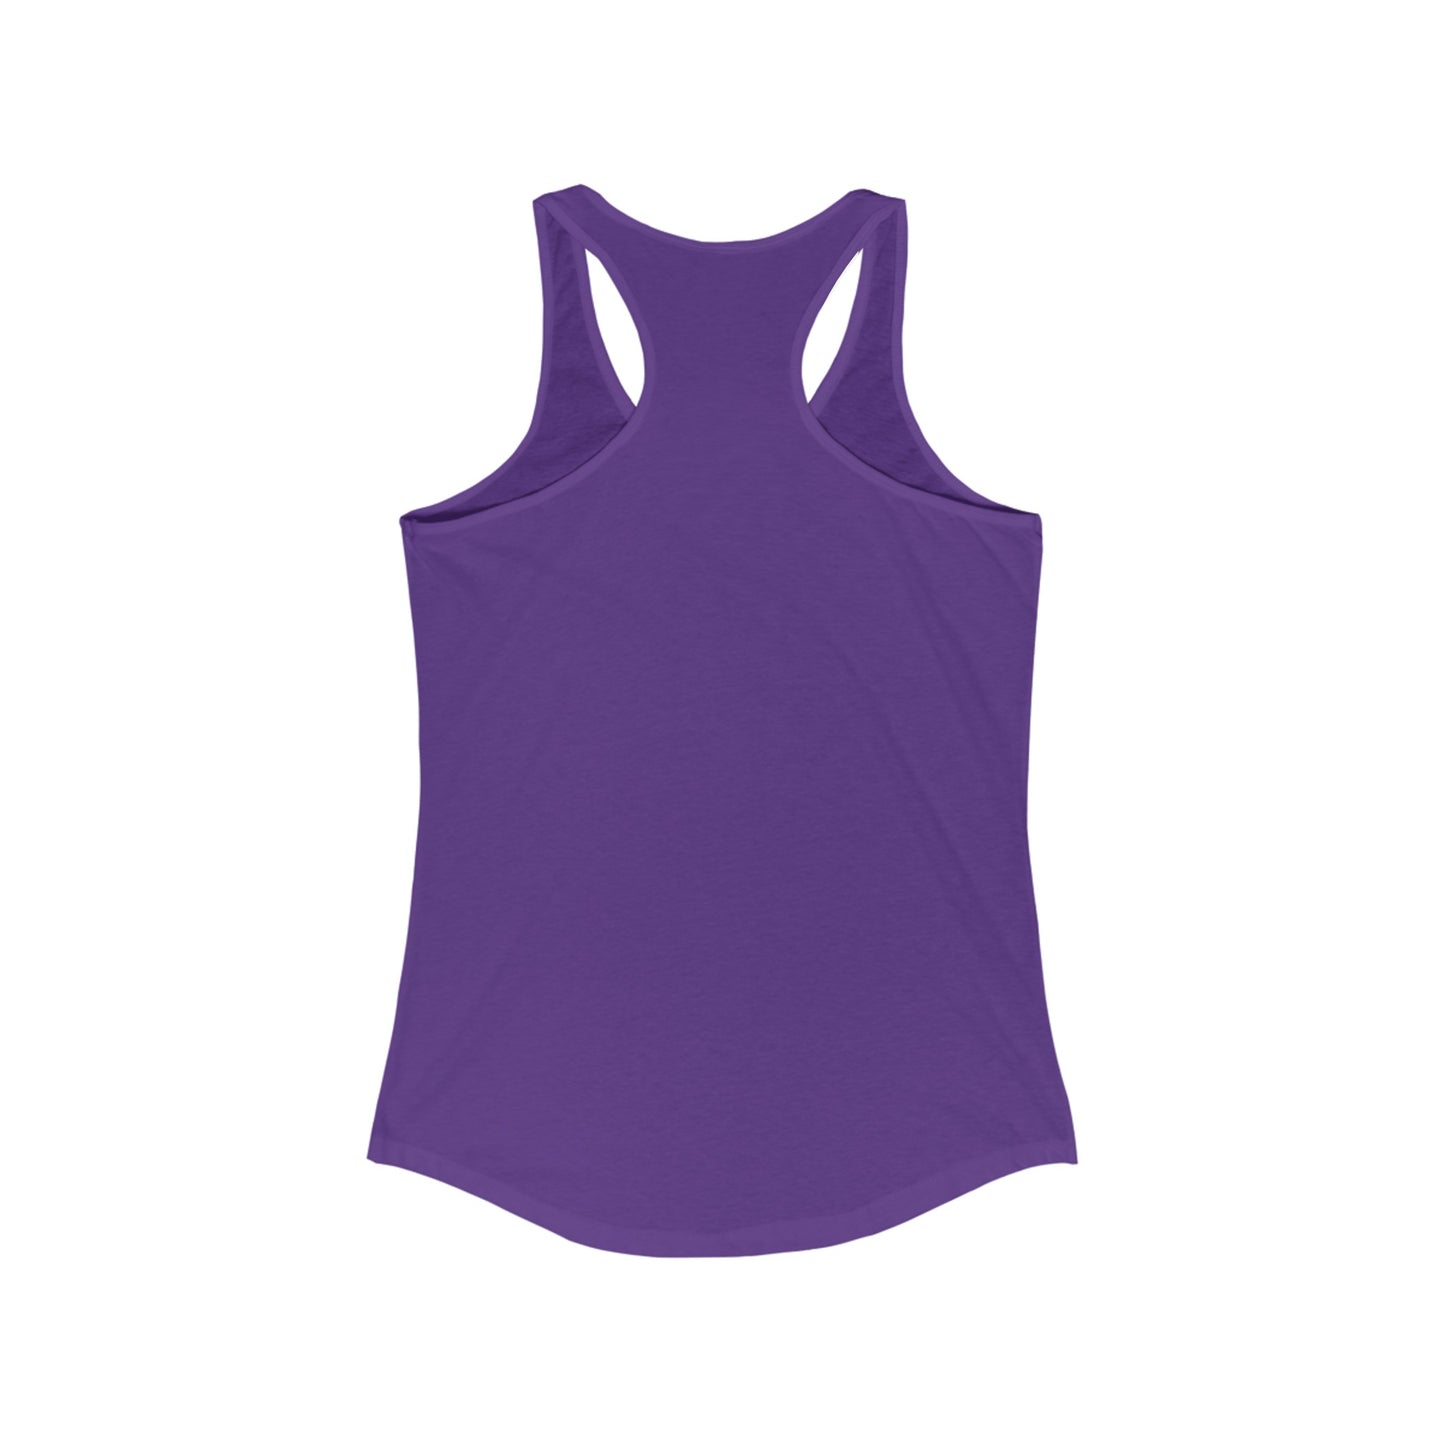 Back View of Layne Studios "Hot Wife Happy Life" Graphic Solid Purple Rush Racerback Tank-Top